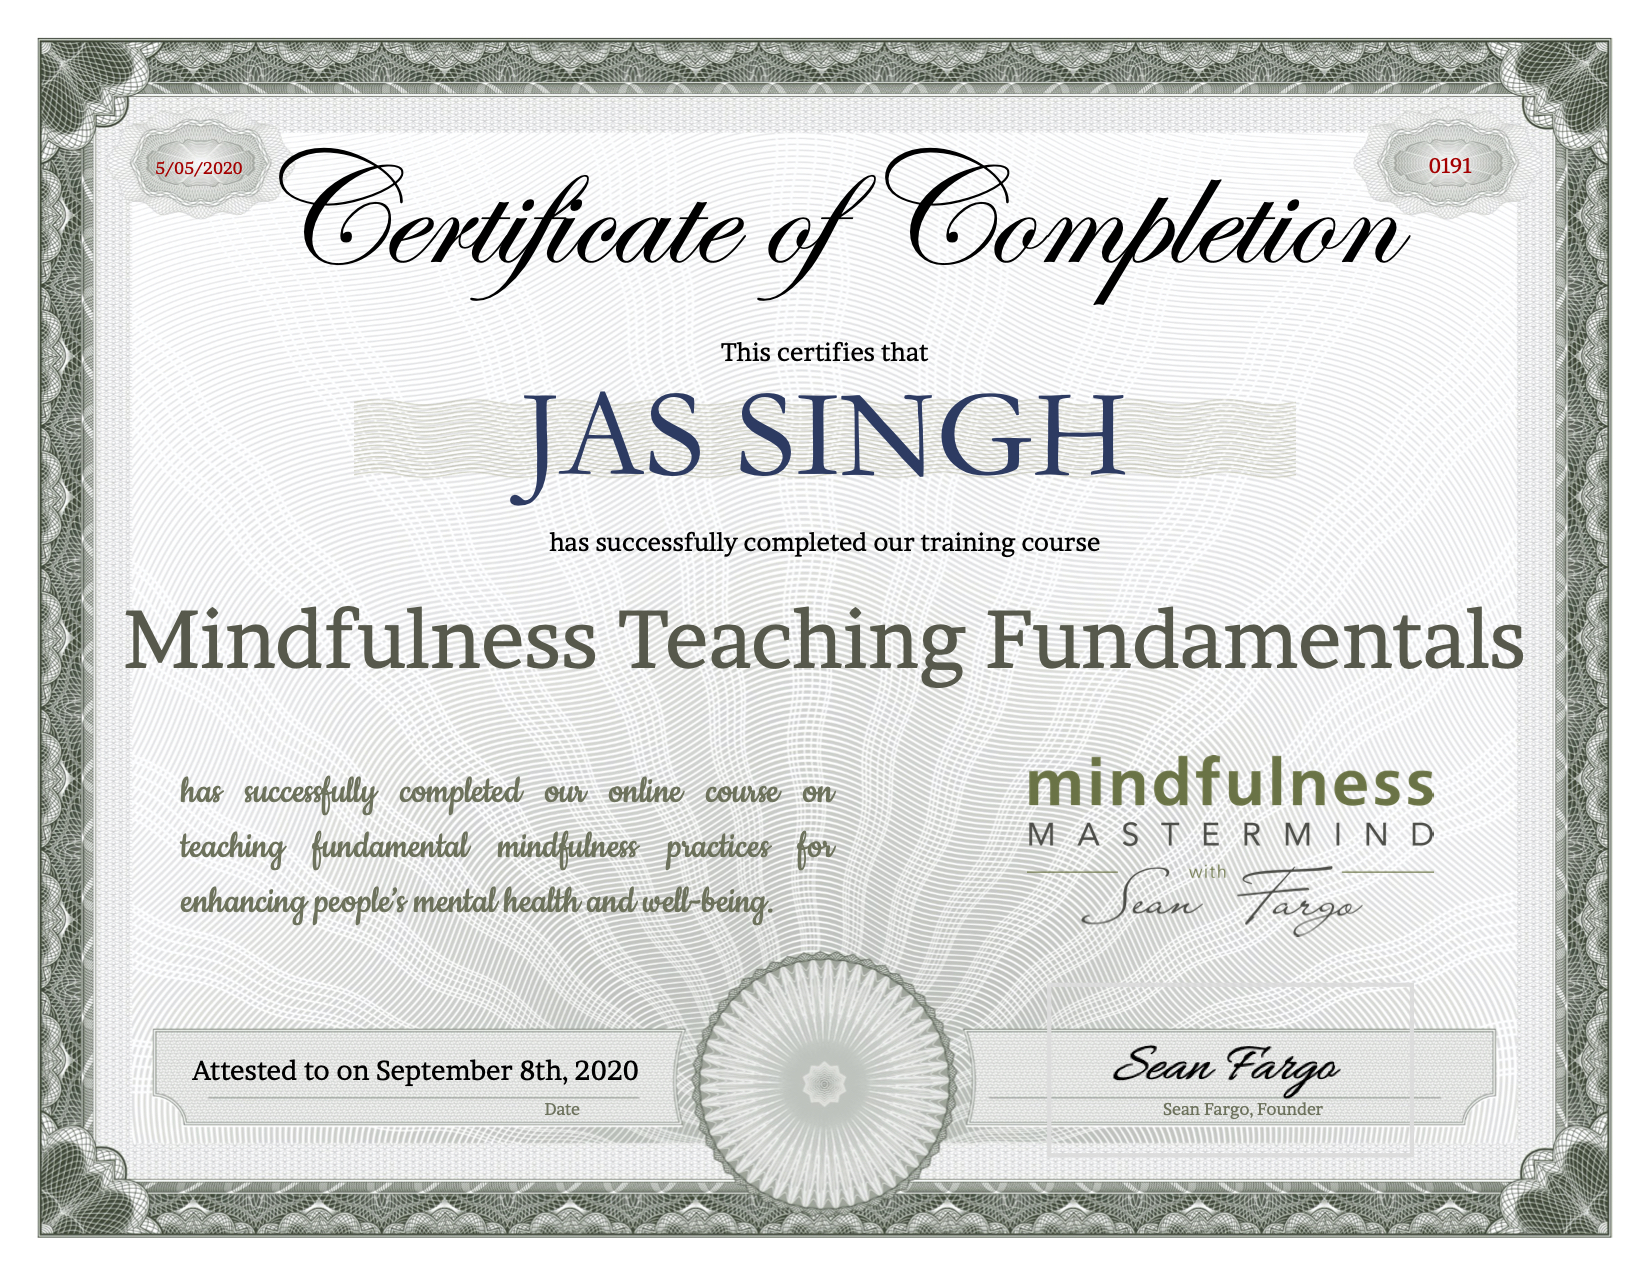 Jas Singh Certificate of Completion - ReflectandRespond